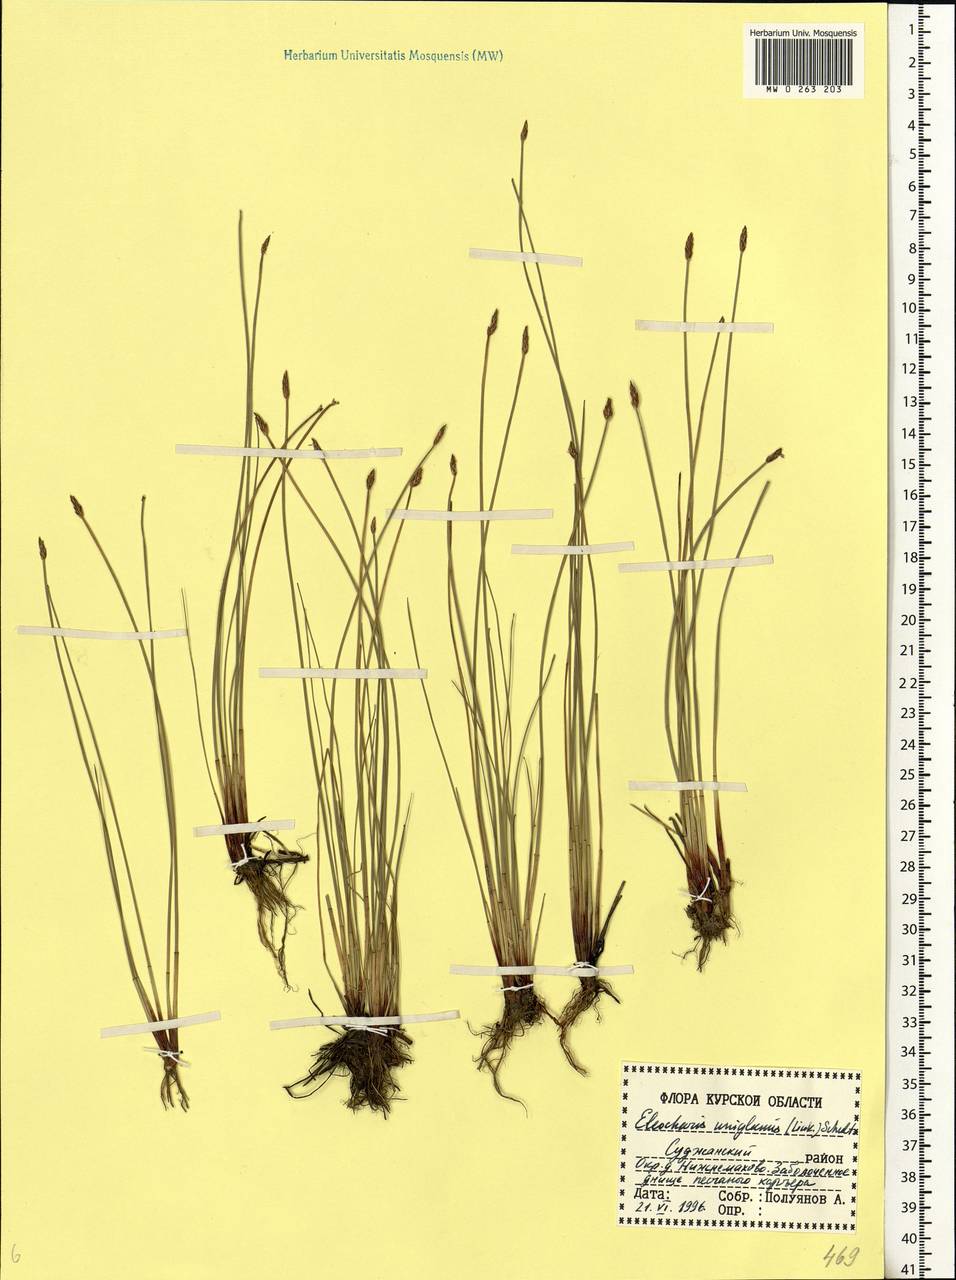 Eleocharis uniglumis (Link) Schult., Eastern Europe, Central forest-and-steppe region (E6) (Russia)